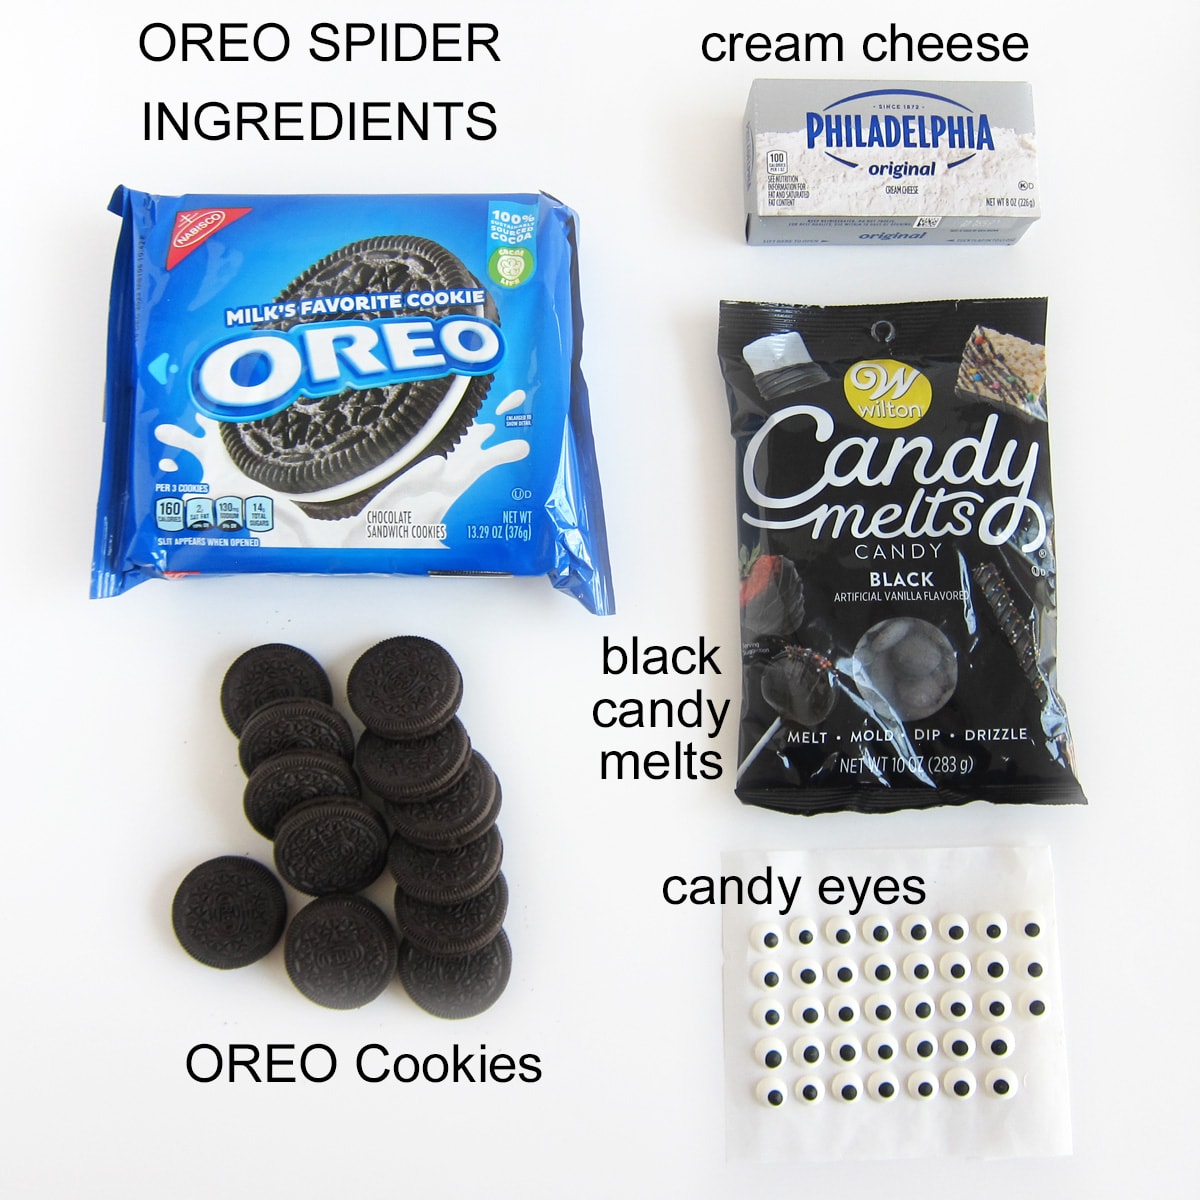 oreo spider ingredients including OREO Cookies, cream cheese, black candy melts, and candy eyes. 